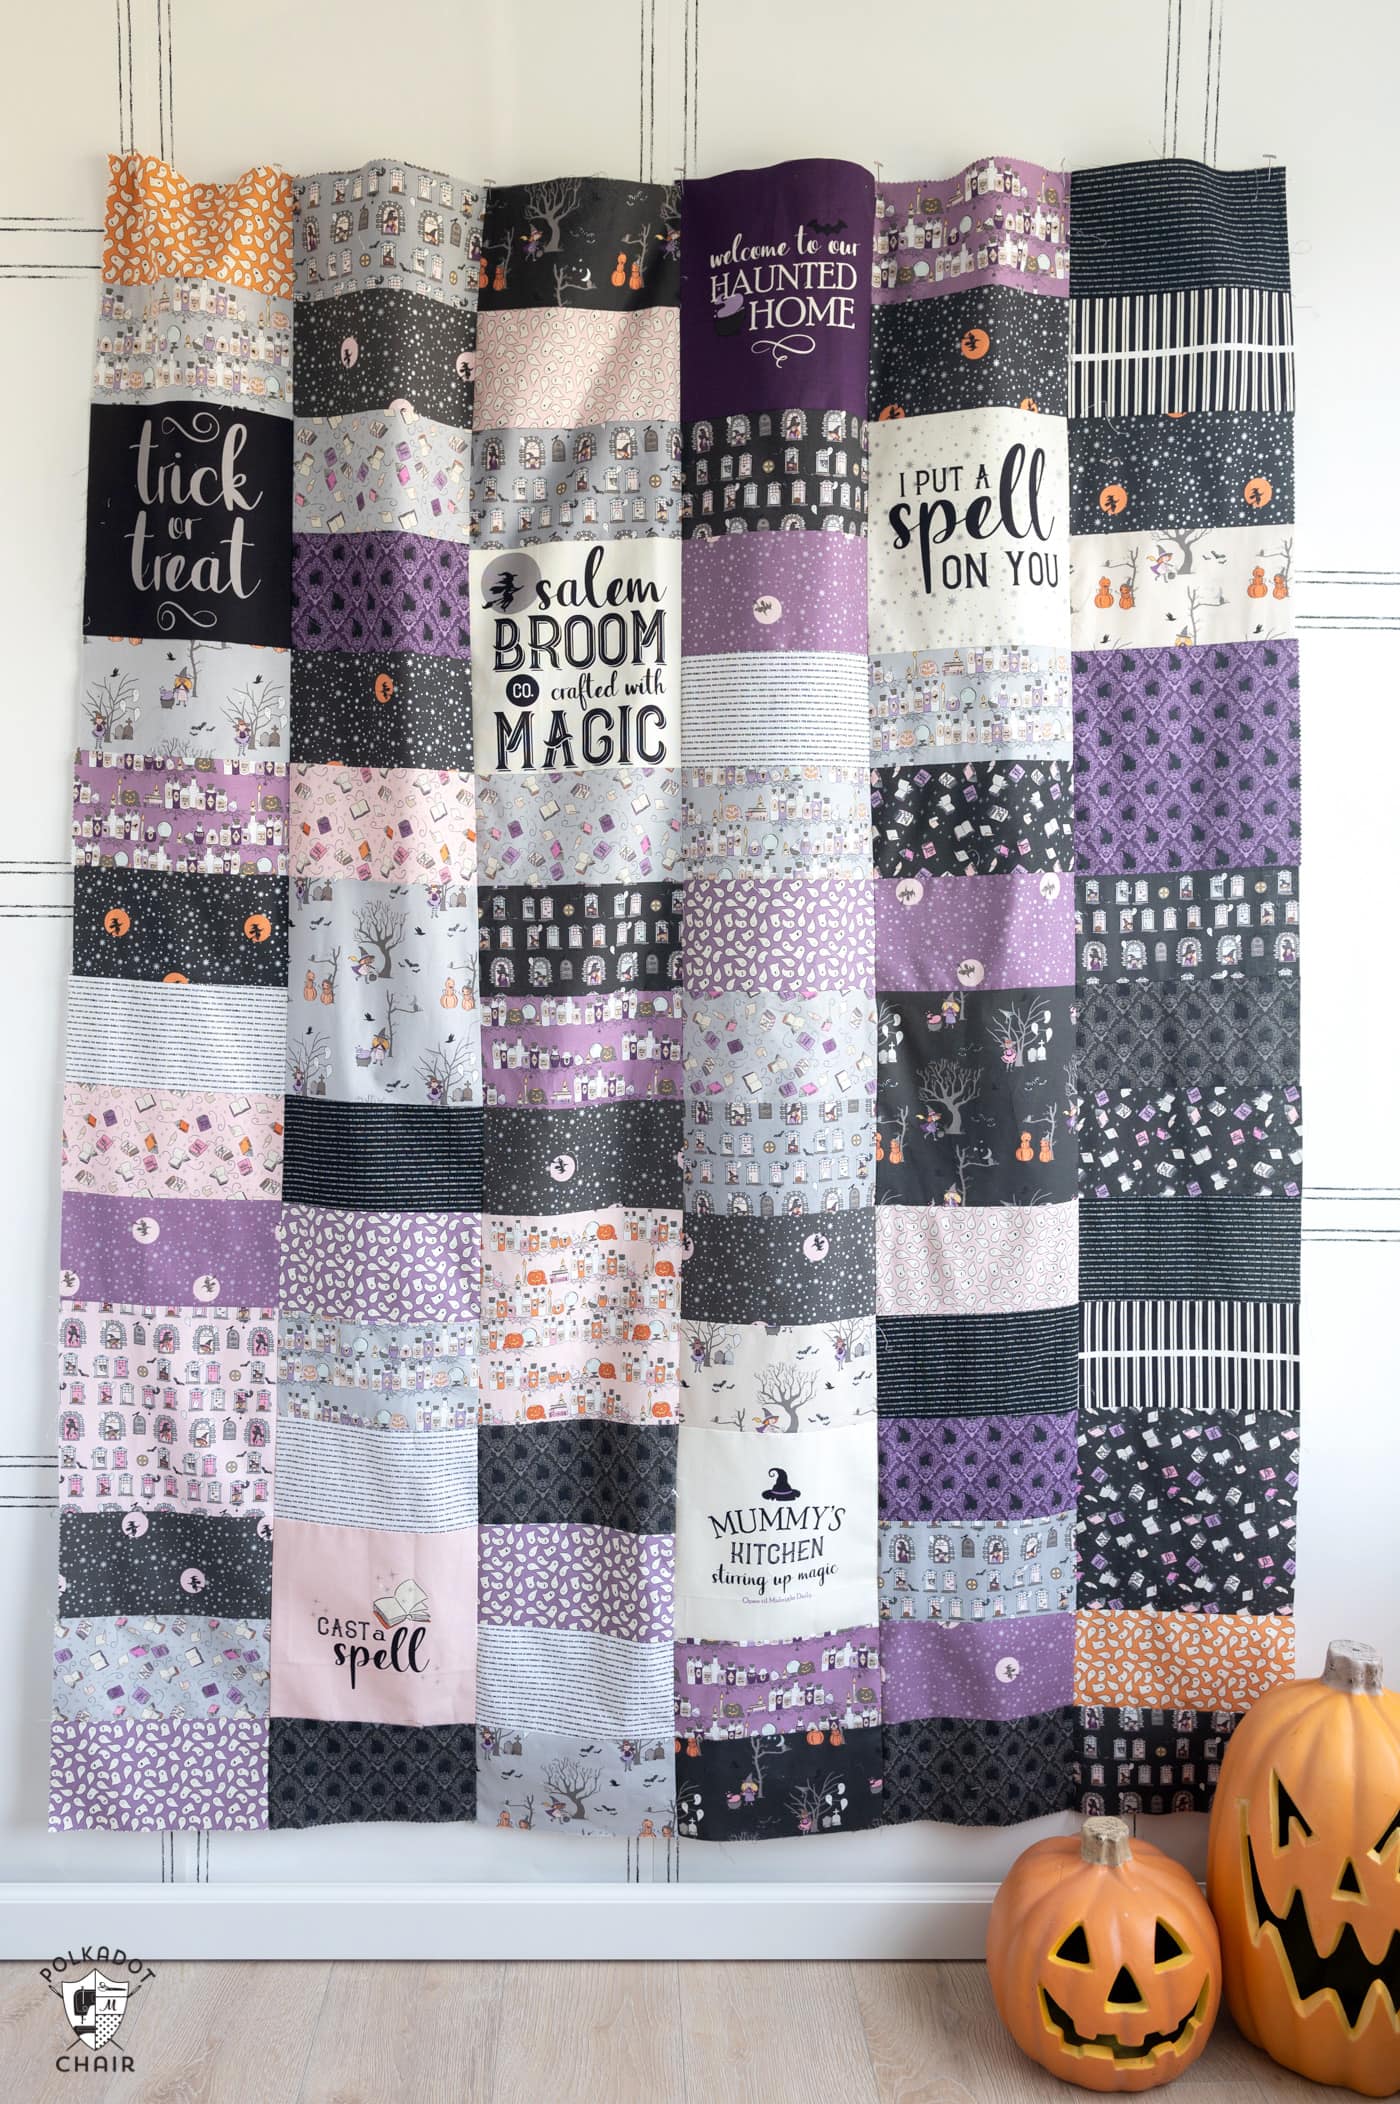 quilt made from purple, black and pink rectangles & squares.